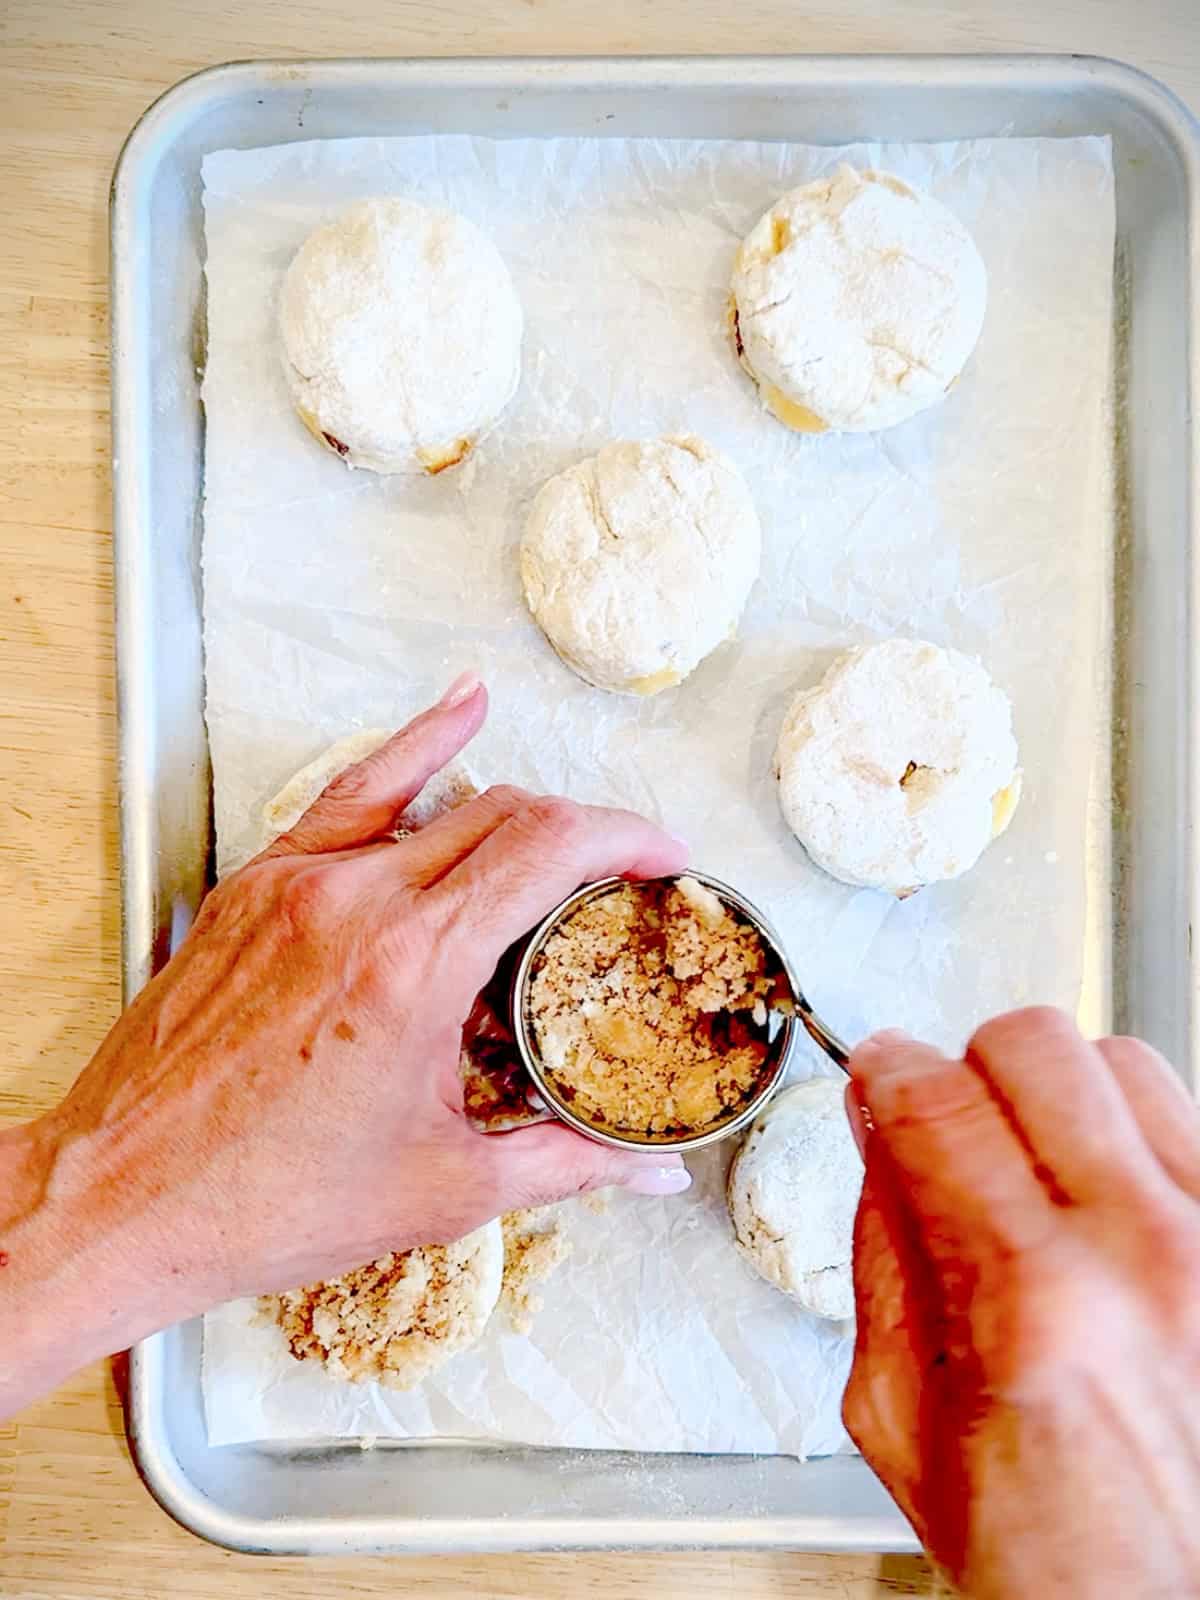 Add streusel to the top of peach biscuits.